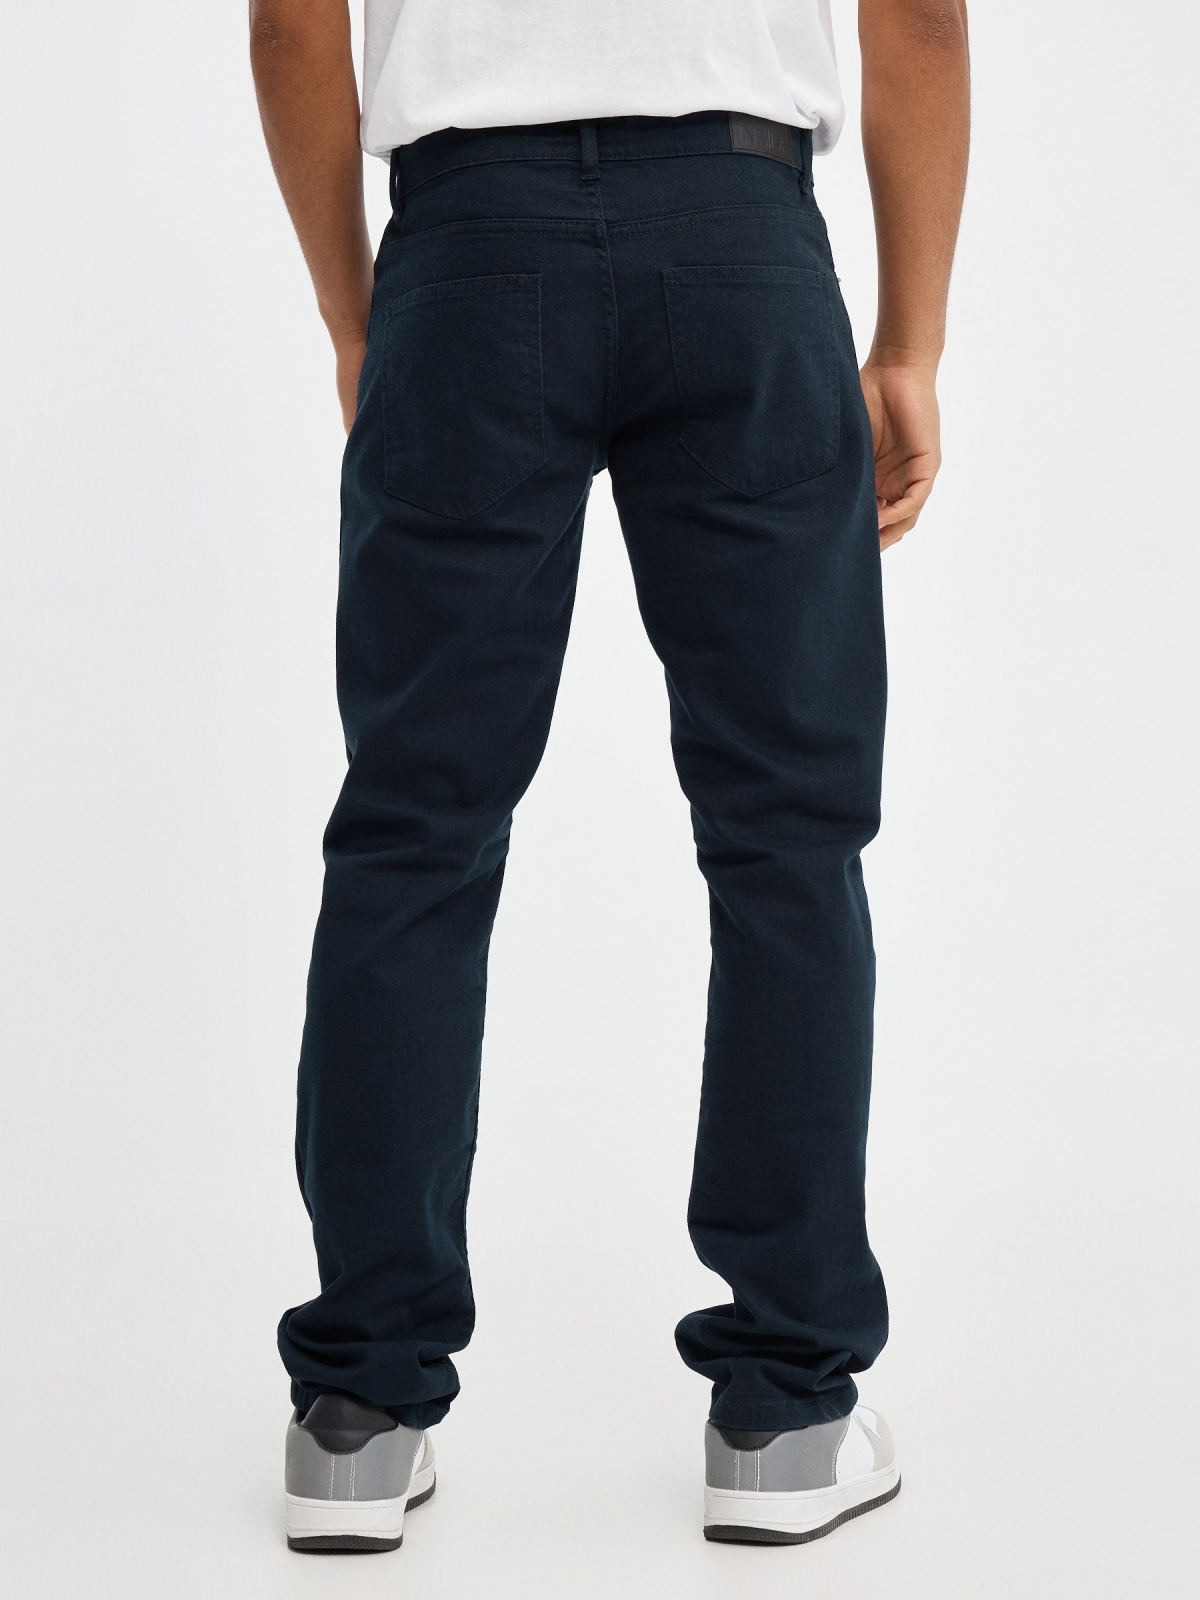 Basic colored jeans blue middle back view